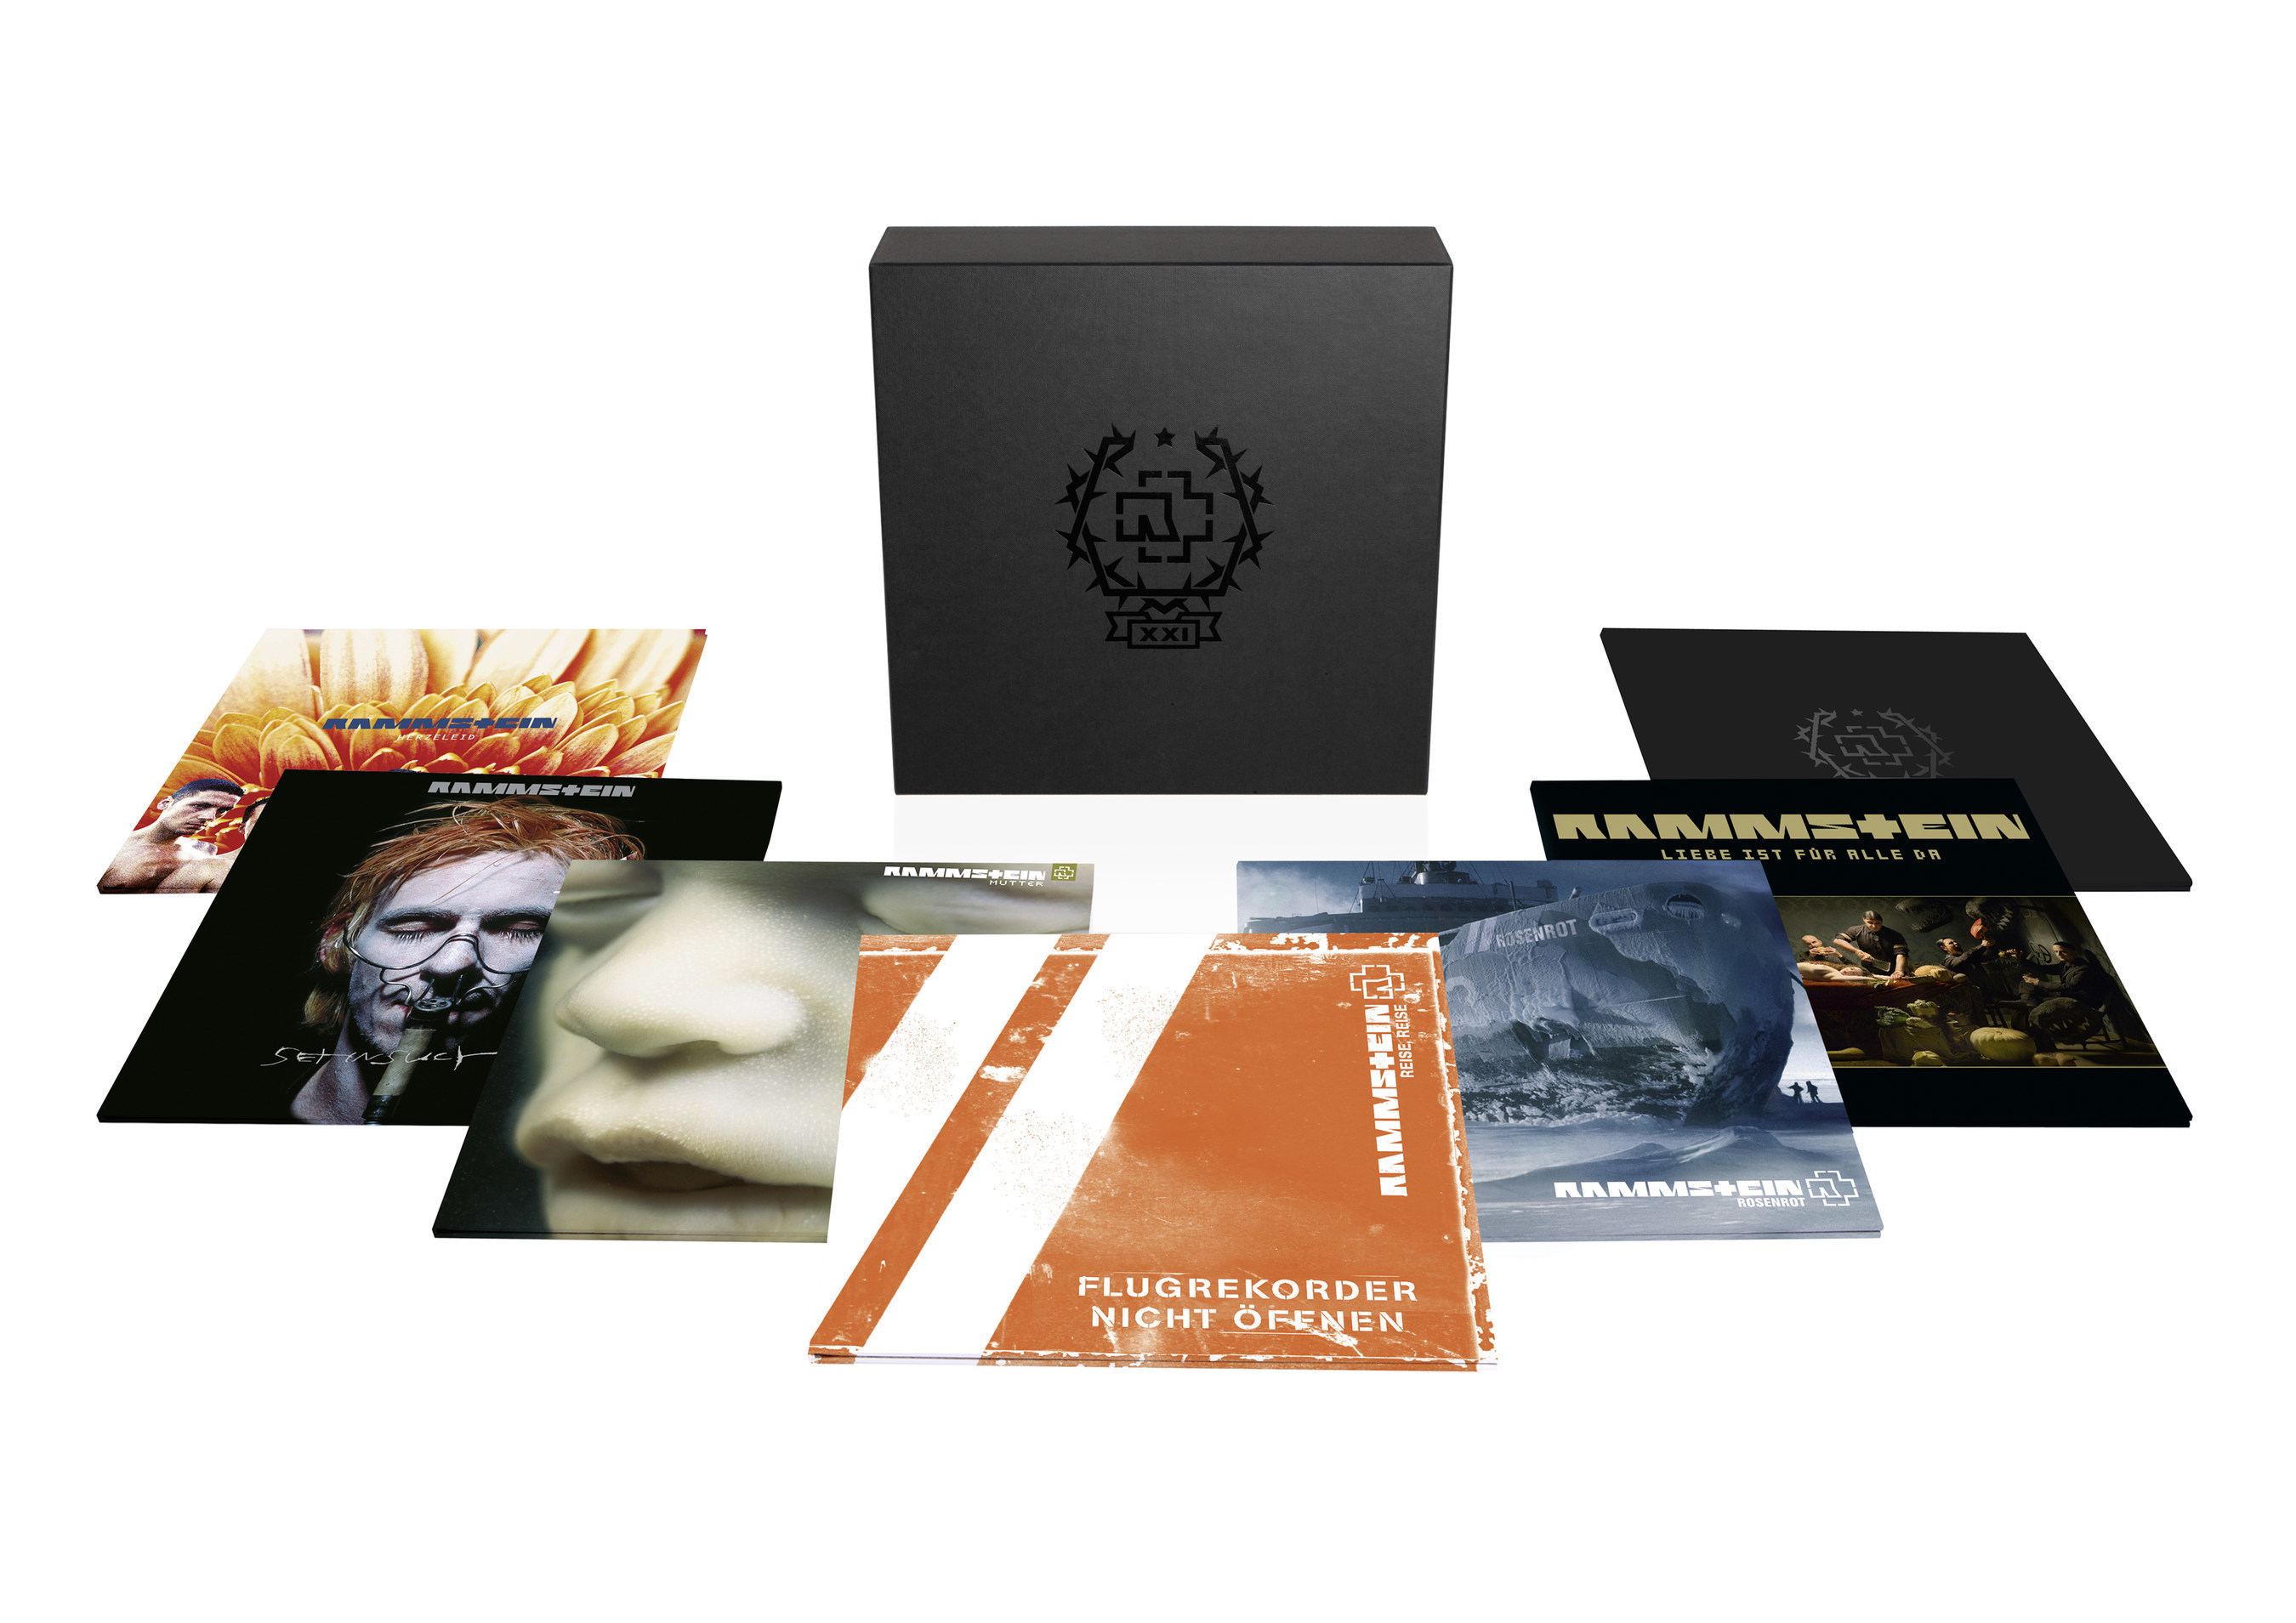 Rammstein marks their 21st anniversary with the December 4 release of the new 'XXI' vinyl box set. The 21st Anniversary collection - a numbered, career-spanning set - not only features the band's six studio albums, produced by Jacob Hellner and re-mastered onto 180-gram heavyweight double vinyl by Svante Forsbäck, it also comes complete with a separate rarities double LP, 'Raritäten,' including a previously unreleased version of the track 'Los.'